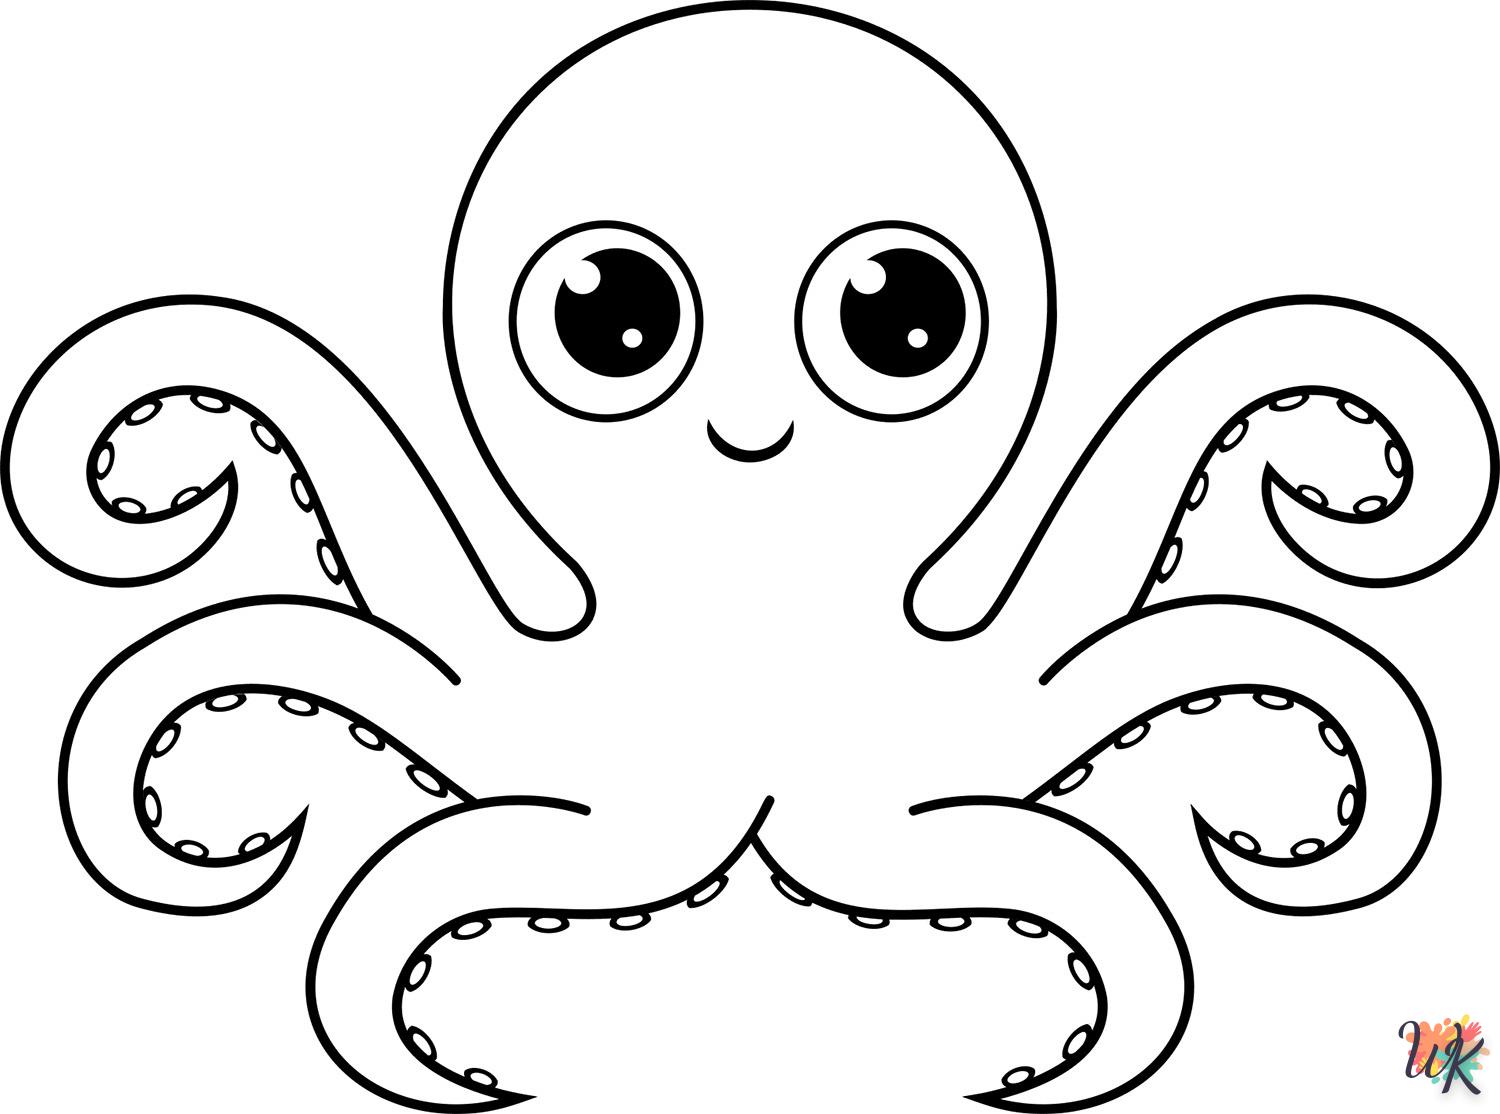 Octopus coloring page autumn online free to print